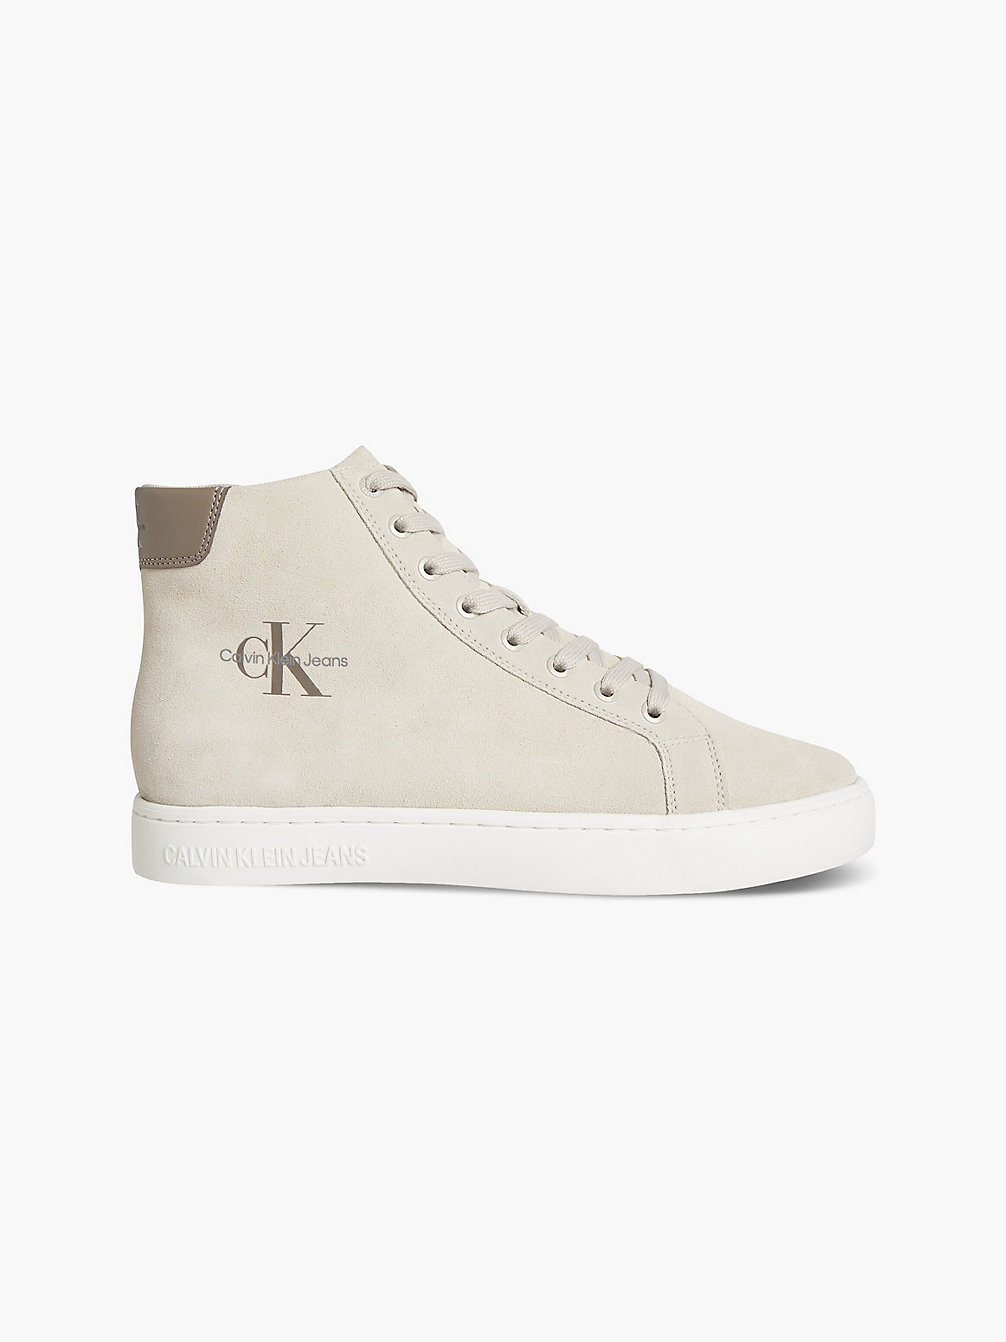 EGGSHELL Suede High-Top Trainers undefined men Calvin Klein